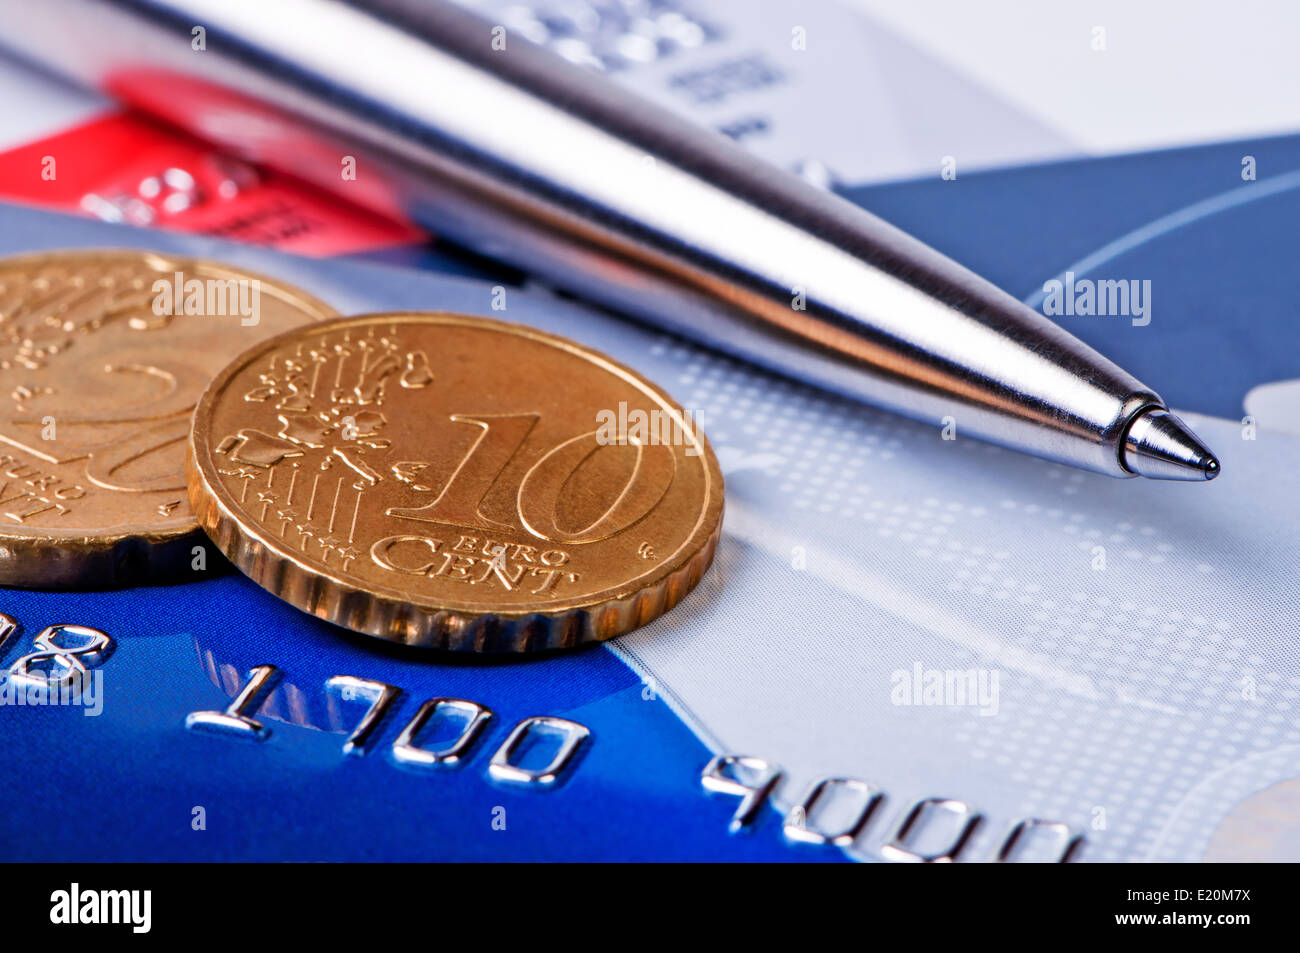 Credit cards and coins with a ball pen. Stock Photo